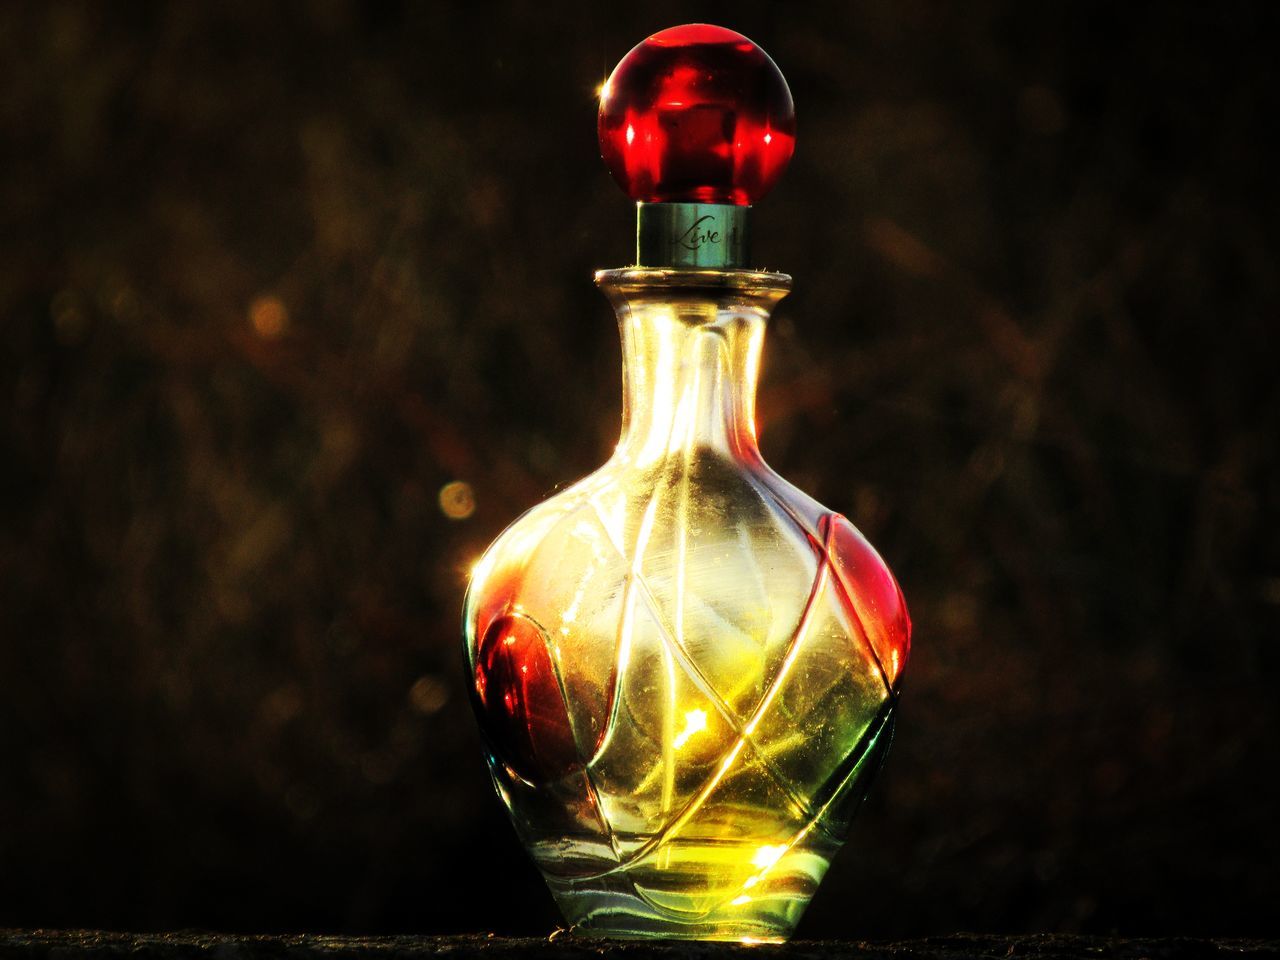 yellow, glass, red, darkness, light, night, distilled beverage, no people, illuminated, lighting equipment, indoors, lighting, single object, perfume, incandescent light bulb, container, macro photography, close-up, glowing, bottle, light bulb, focus on foreground, still life, black background